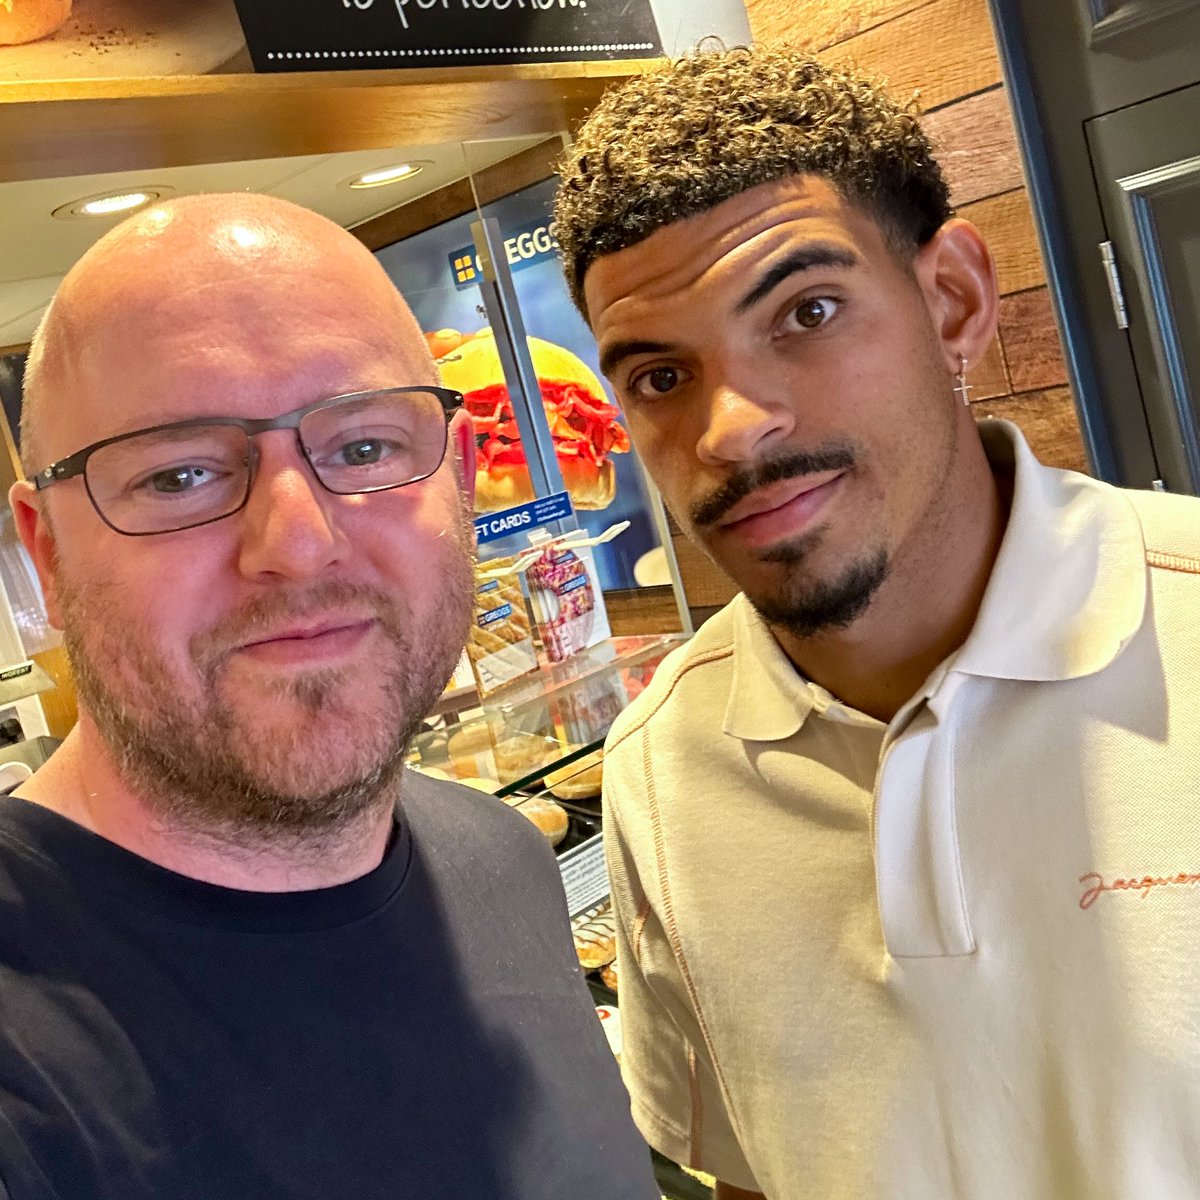 Popped into my local @GreggsOfficial and left with a baguette, sausage roll, and a photo with @Morgangibbs27 #NFFC